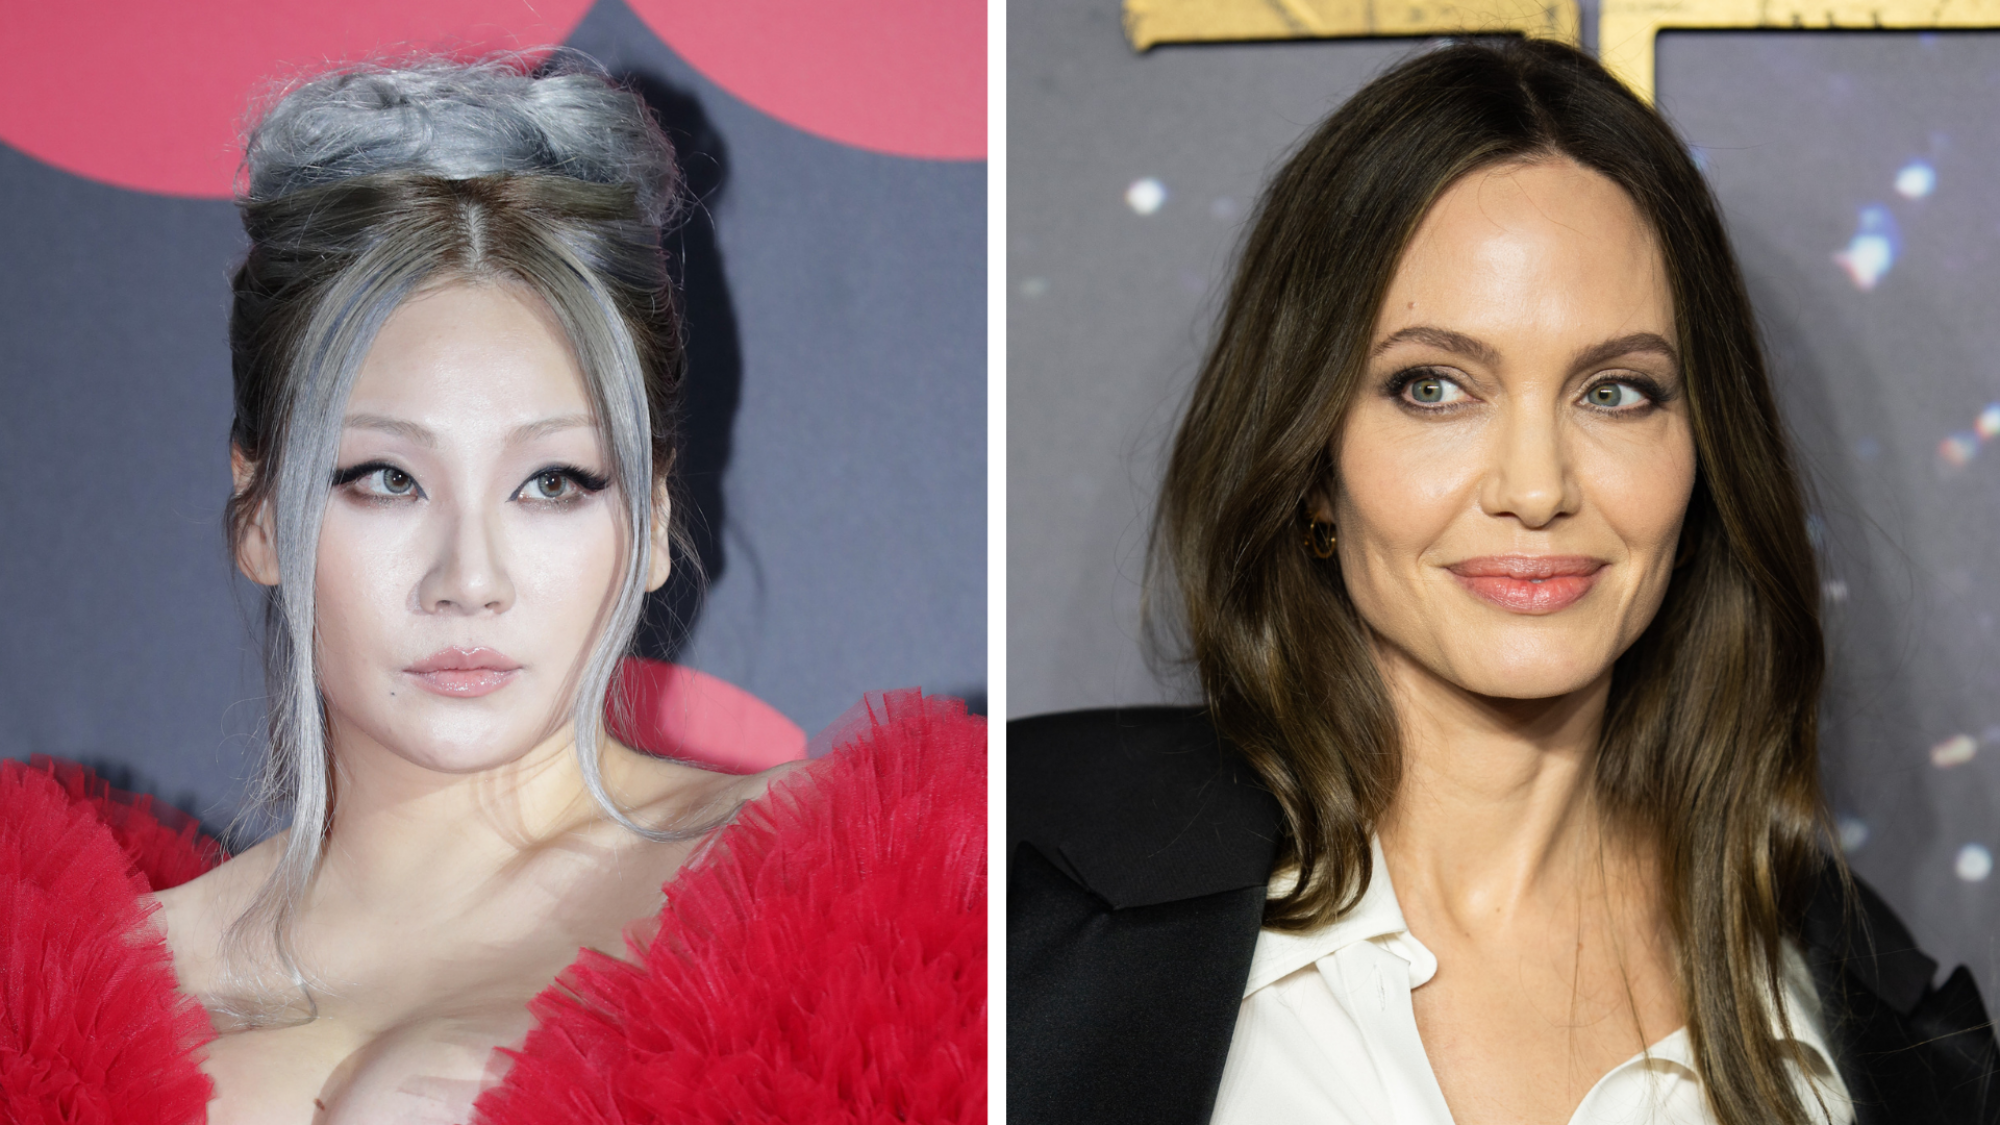 Two photos: CL on the left, Angelina Jolie on the right.